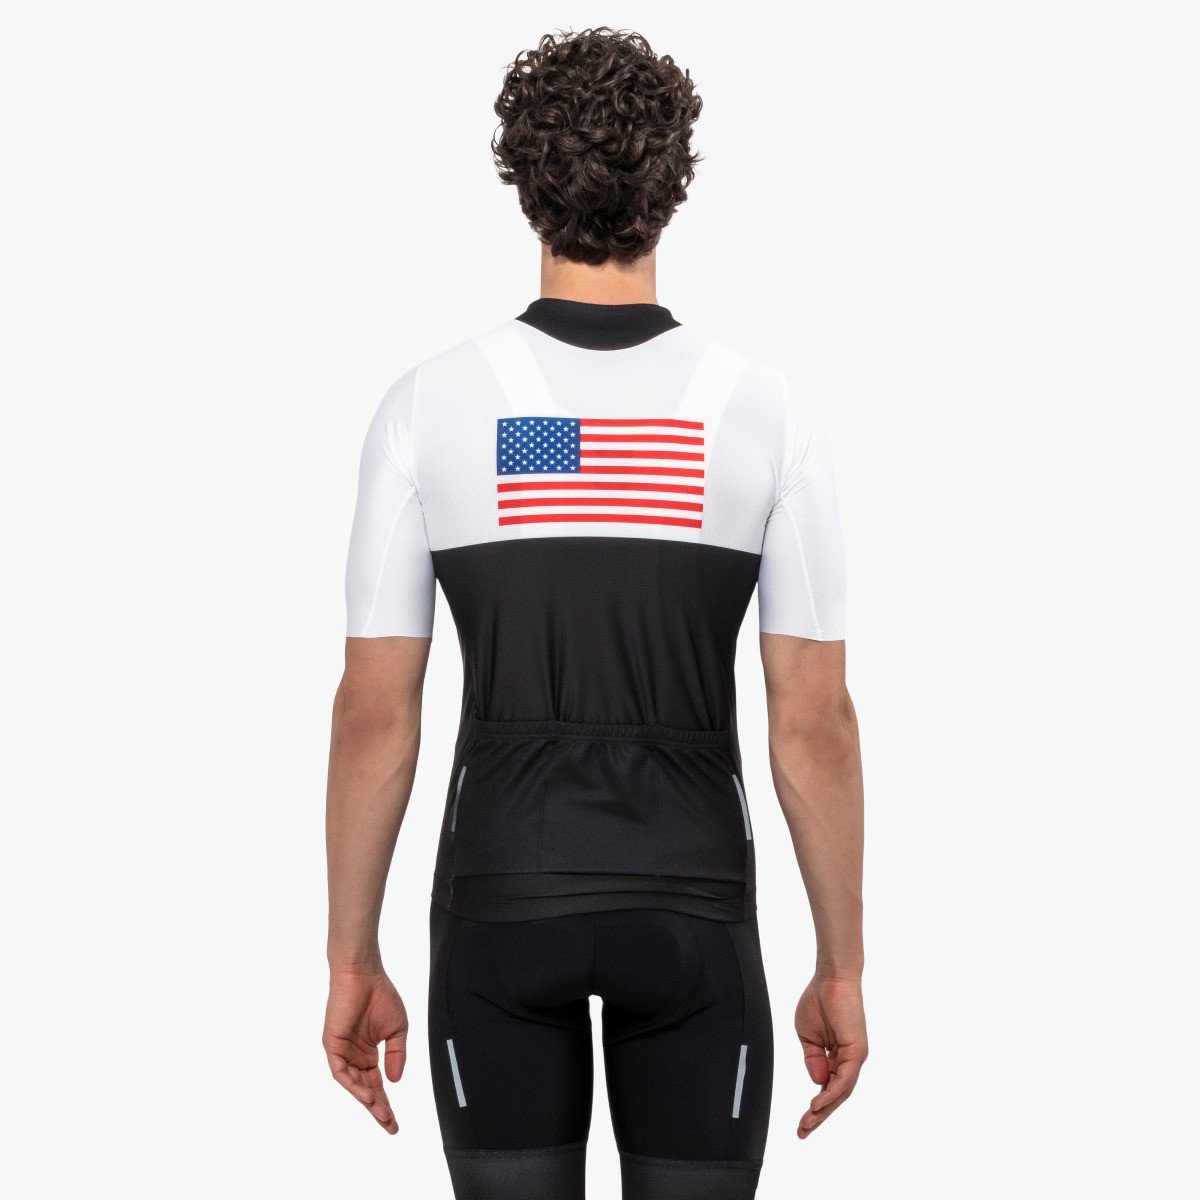 scicon space agency cycling clothing jersey nasa 10